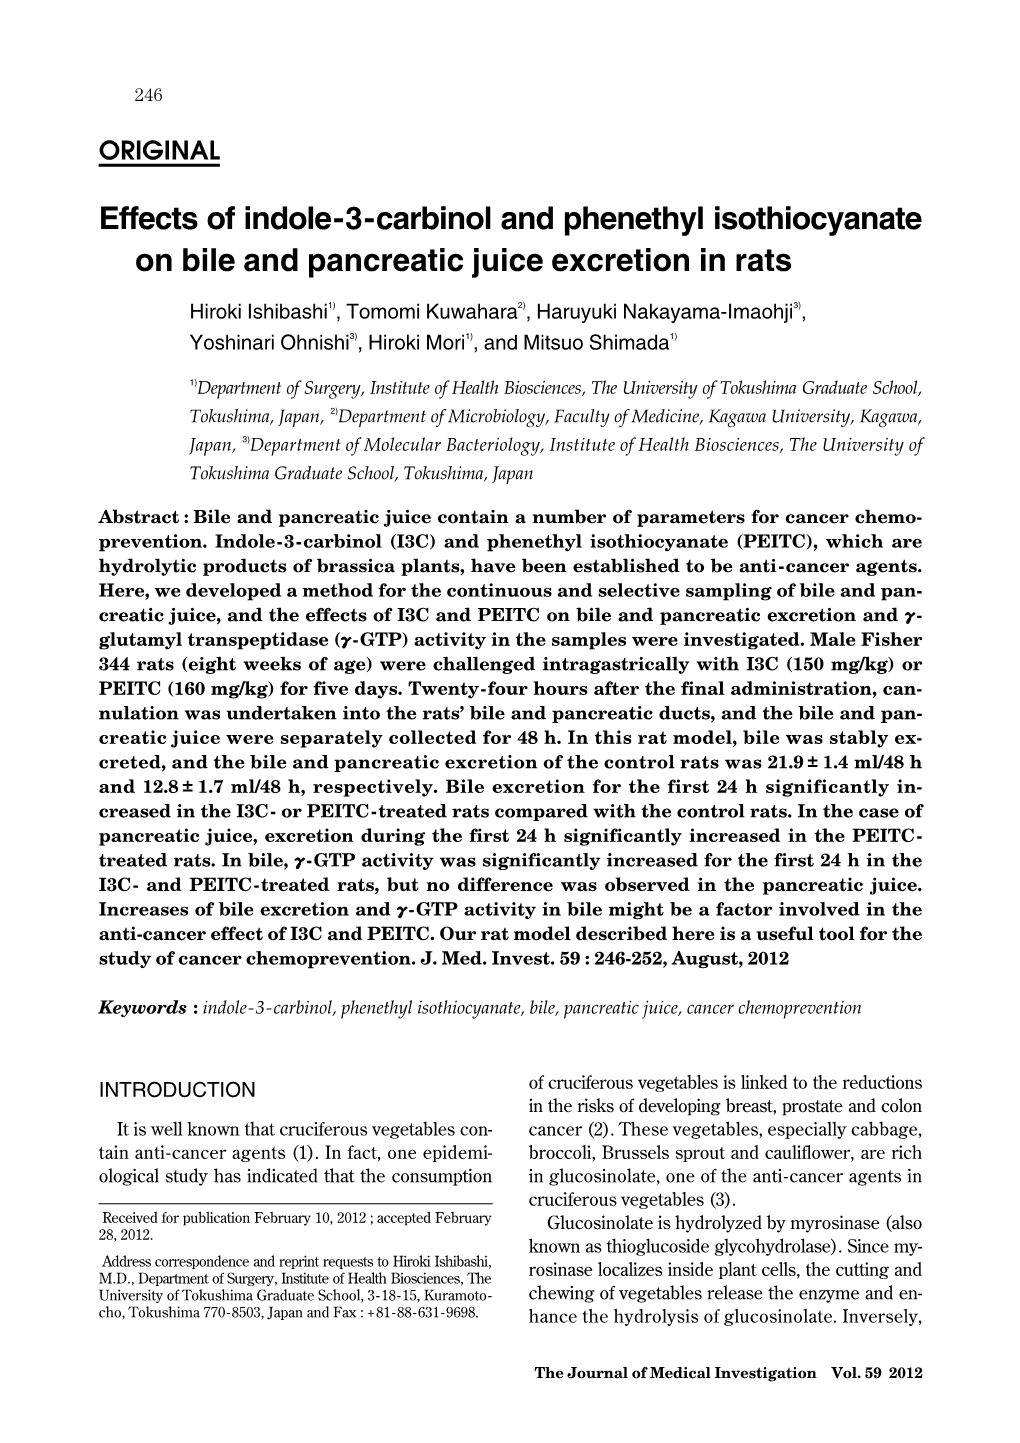 Effects of Indole-3-Carbinol and Phenethyl Isothiocyanate on Bile and Pancreatic Juice Excretion in Rats